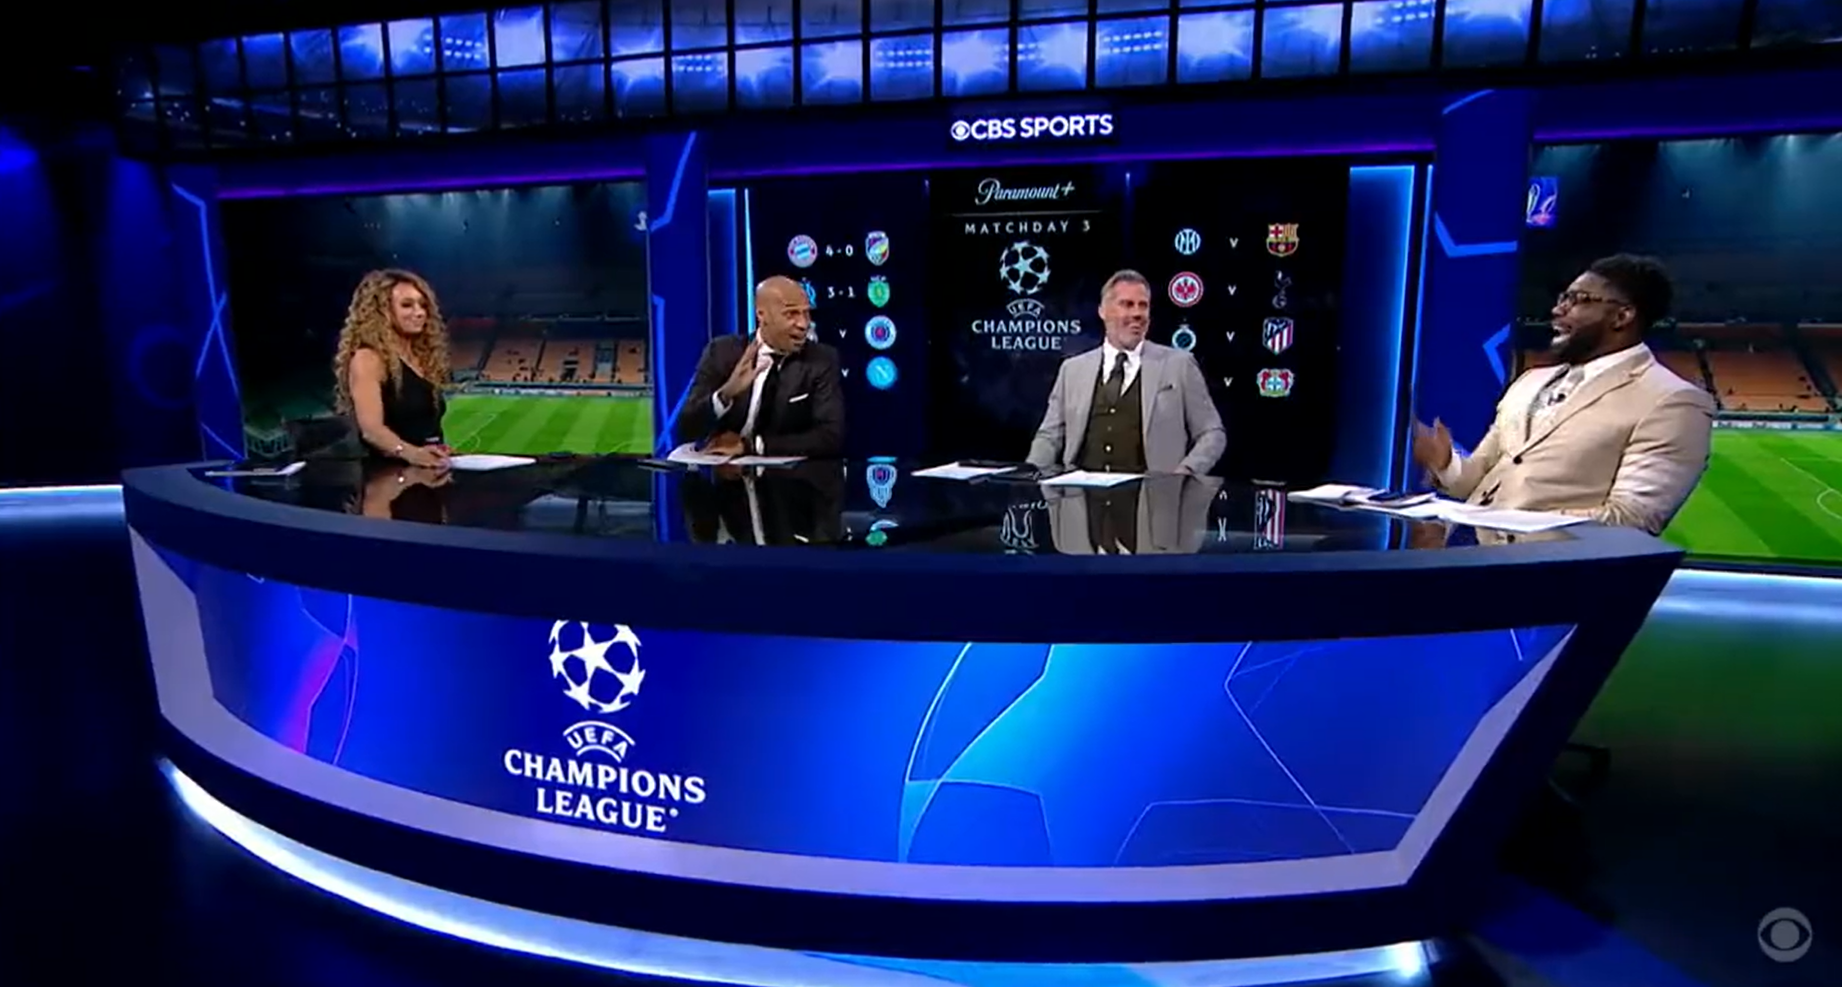 Presenter had Henry & Carragher in stitches after tearing into Richards' CL record on live TV